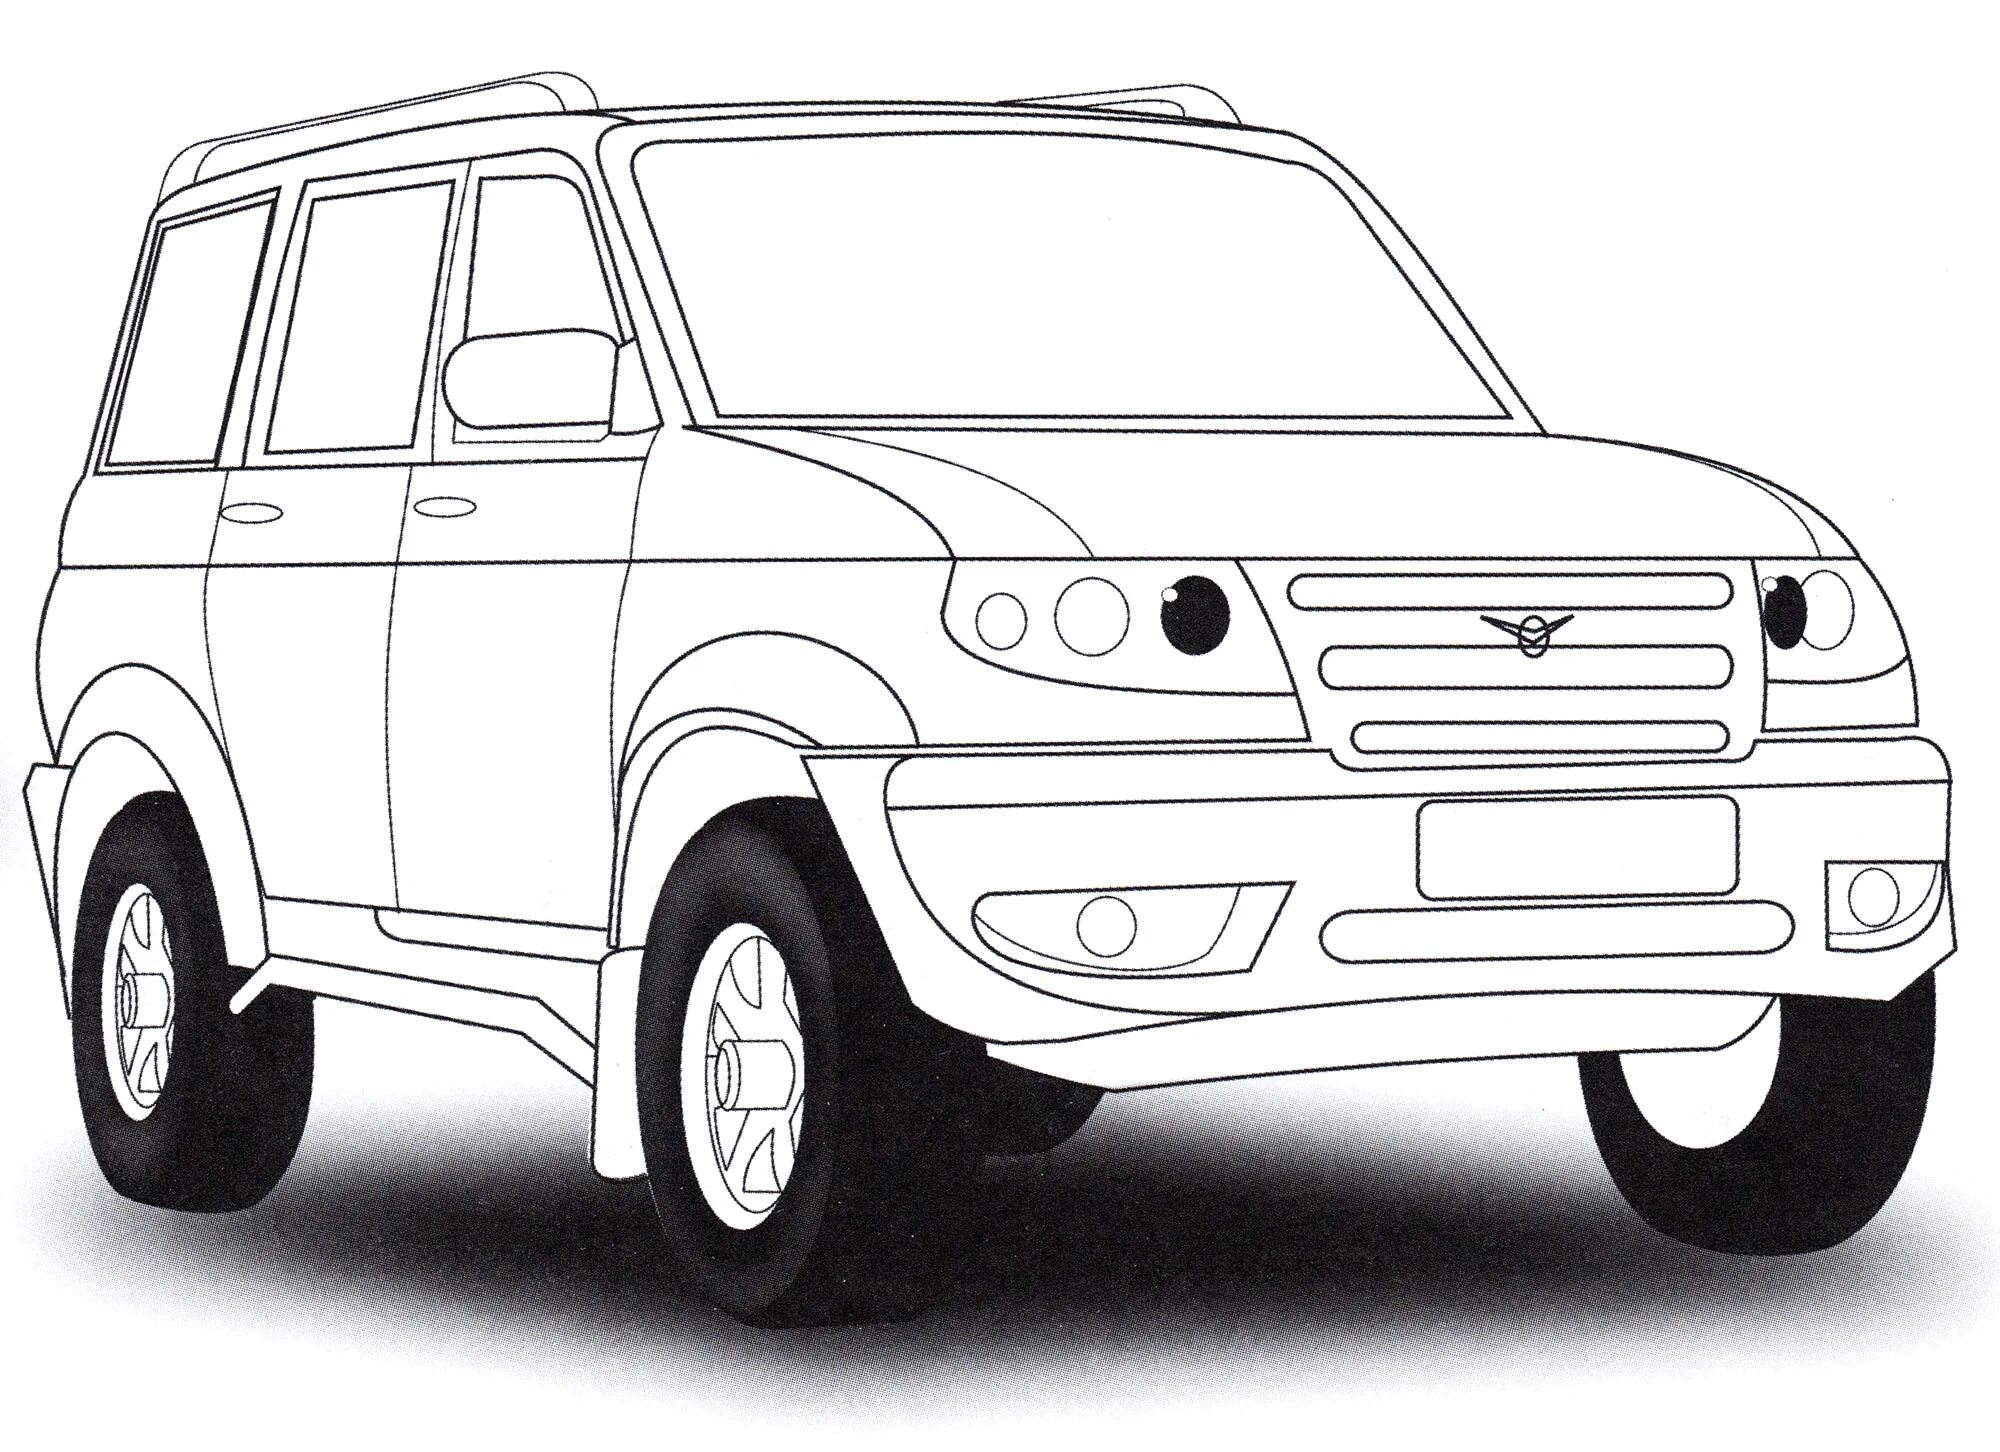 UAZ funny coloring book for kids